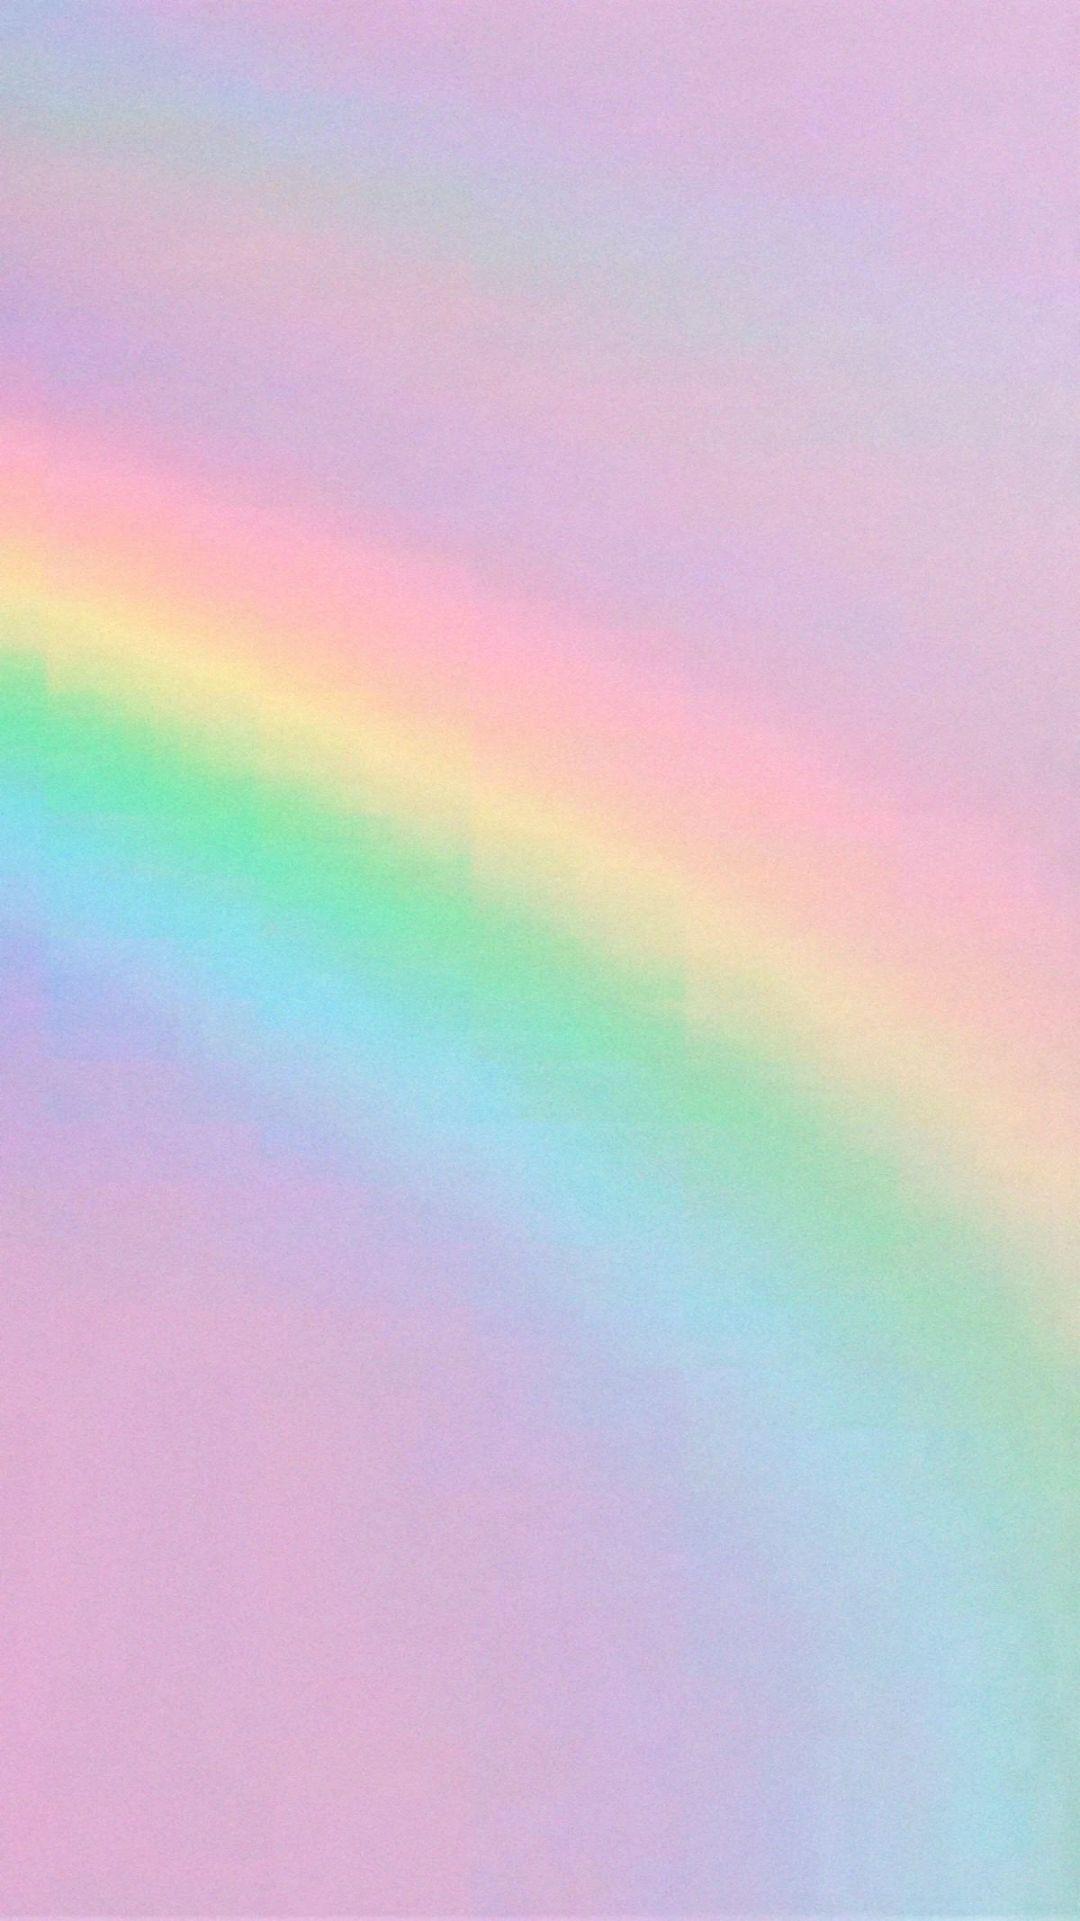 Rainbow Aesthetic Wallpapers - Wallpaper Cave